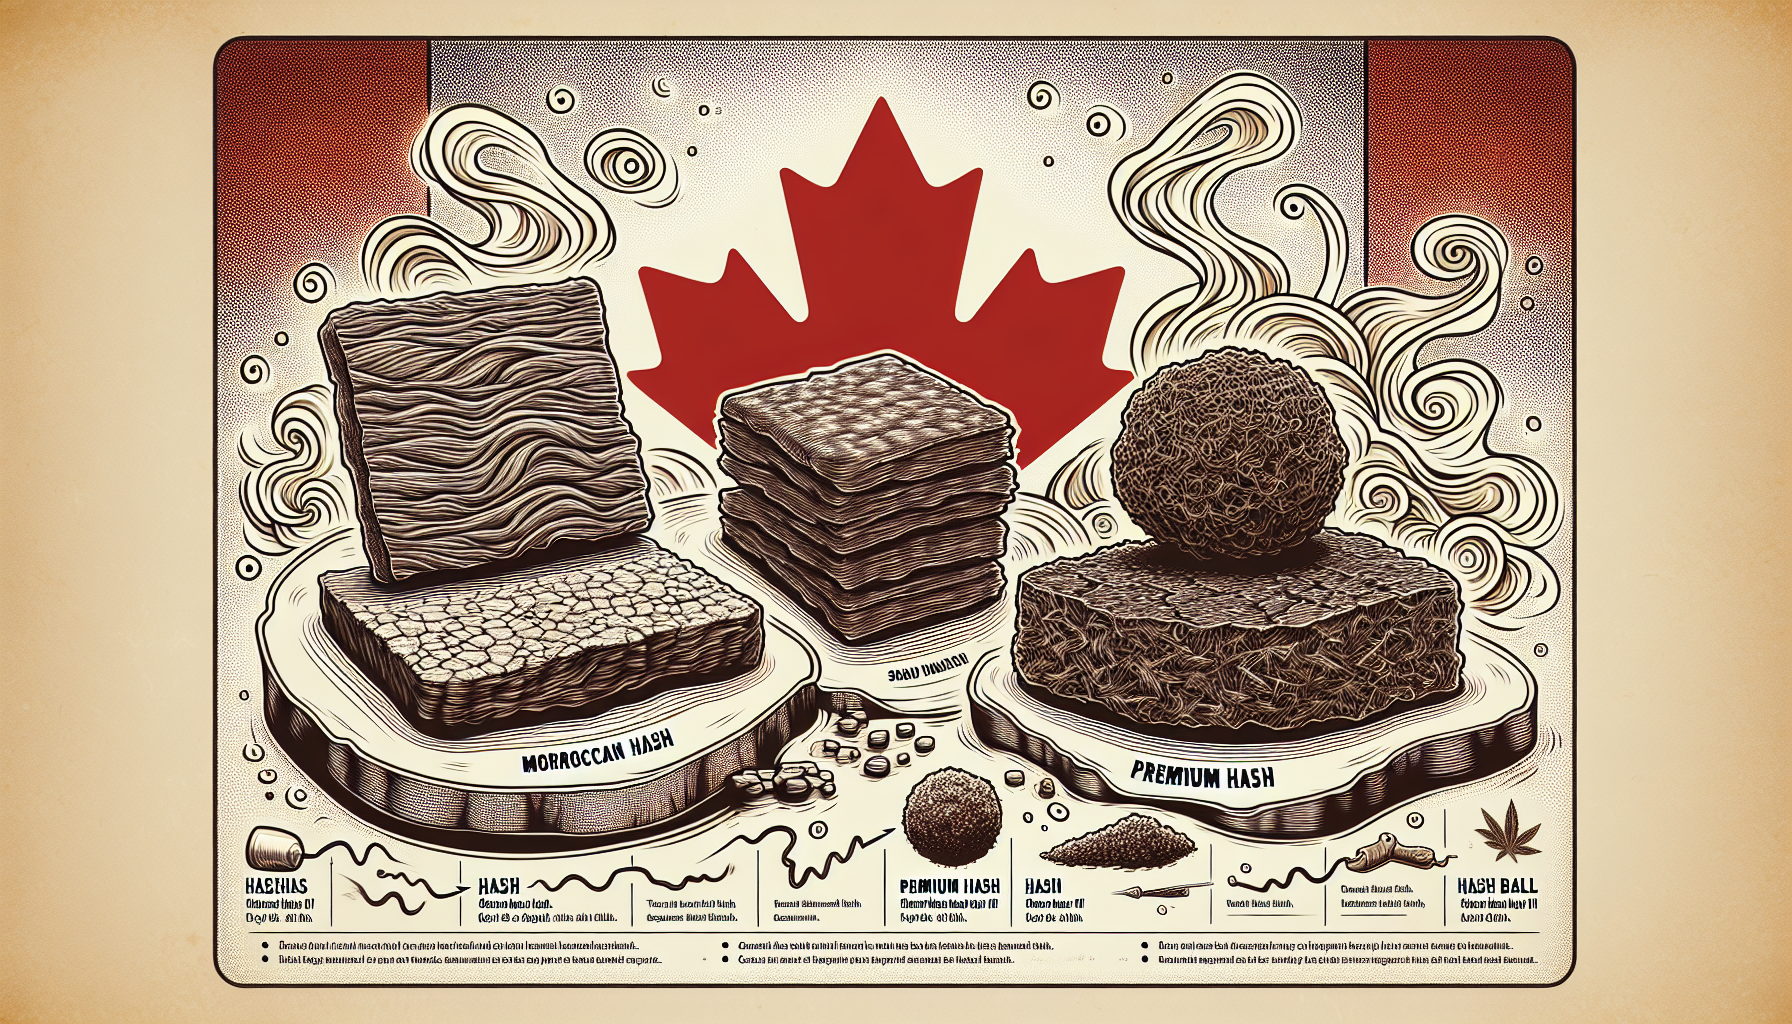 Illustration of different types of hash and their effects in Canada